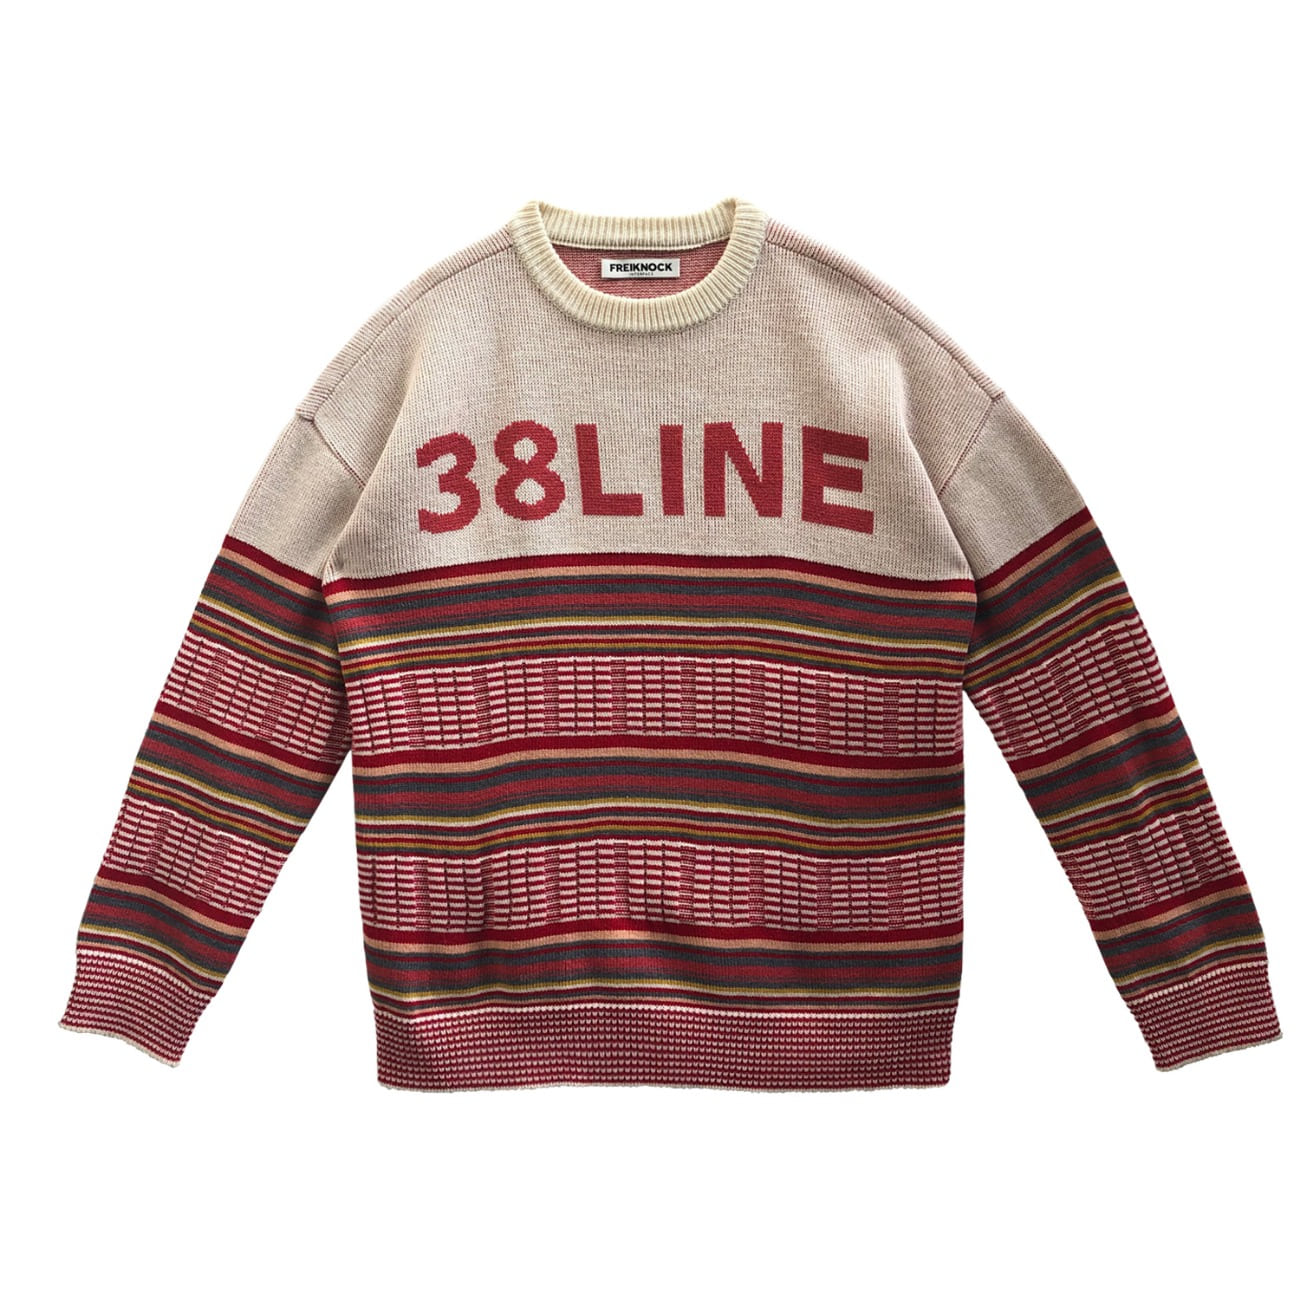 38 LINE KNIT PULLOVER